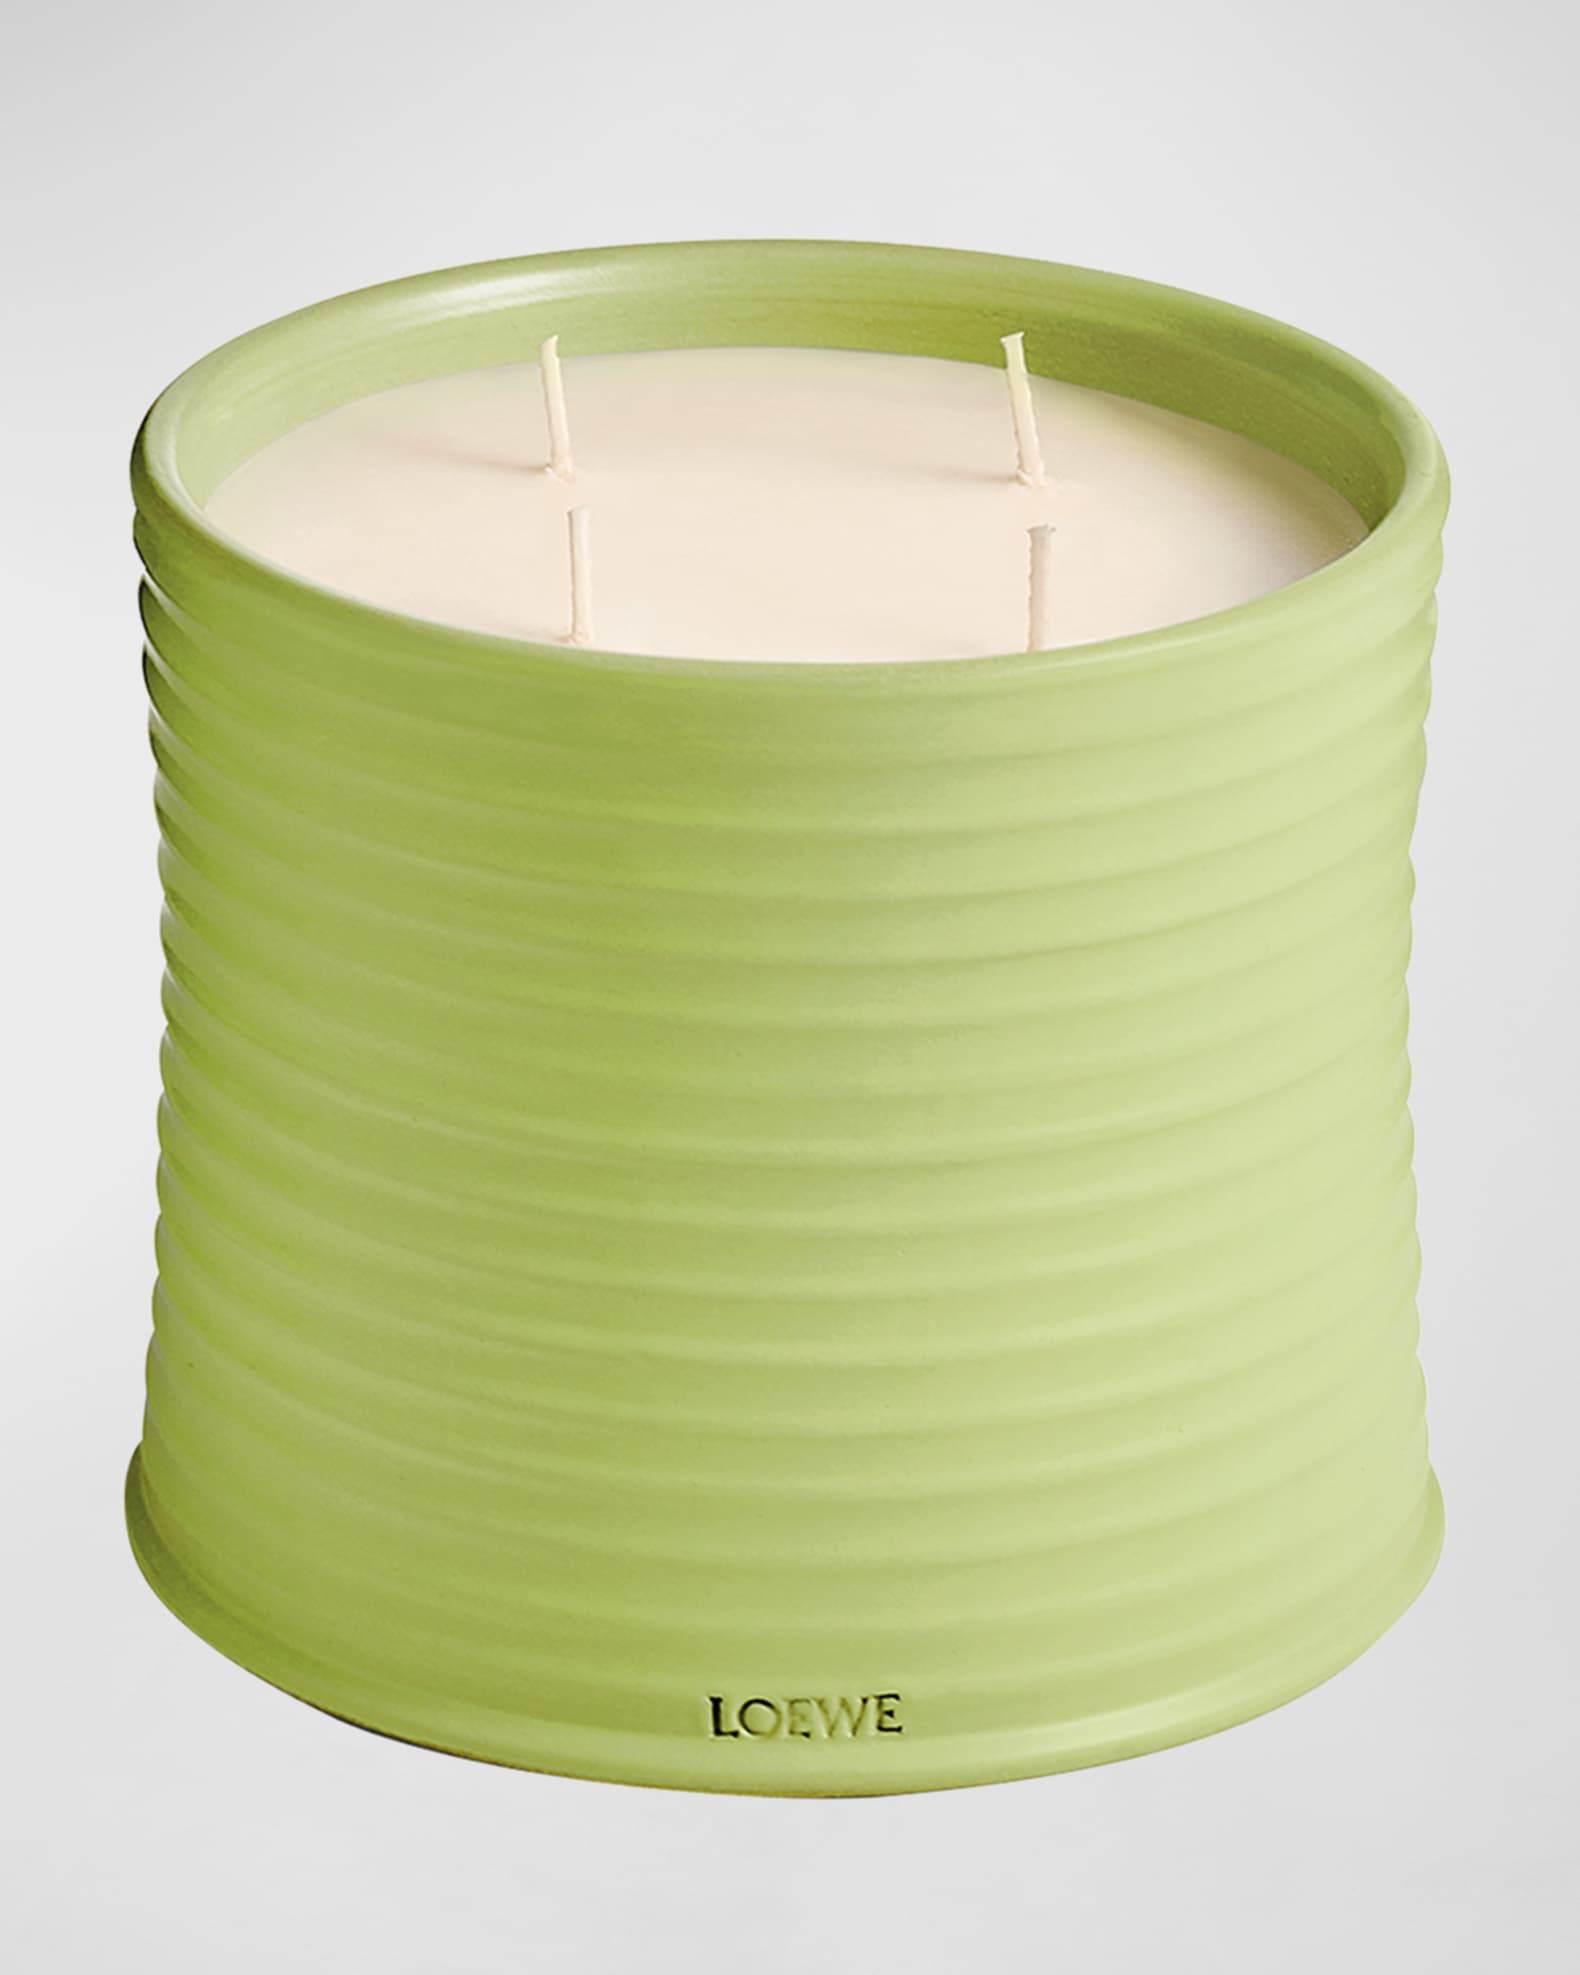 Get lit this Christmas with the debut Louis Vuitton candle collection - ICON